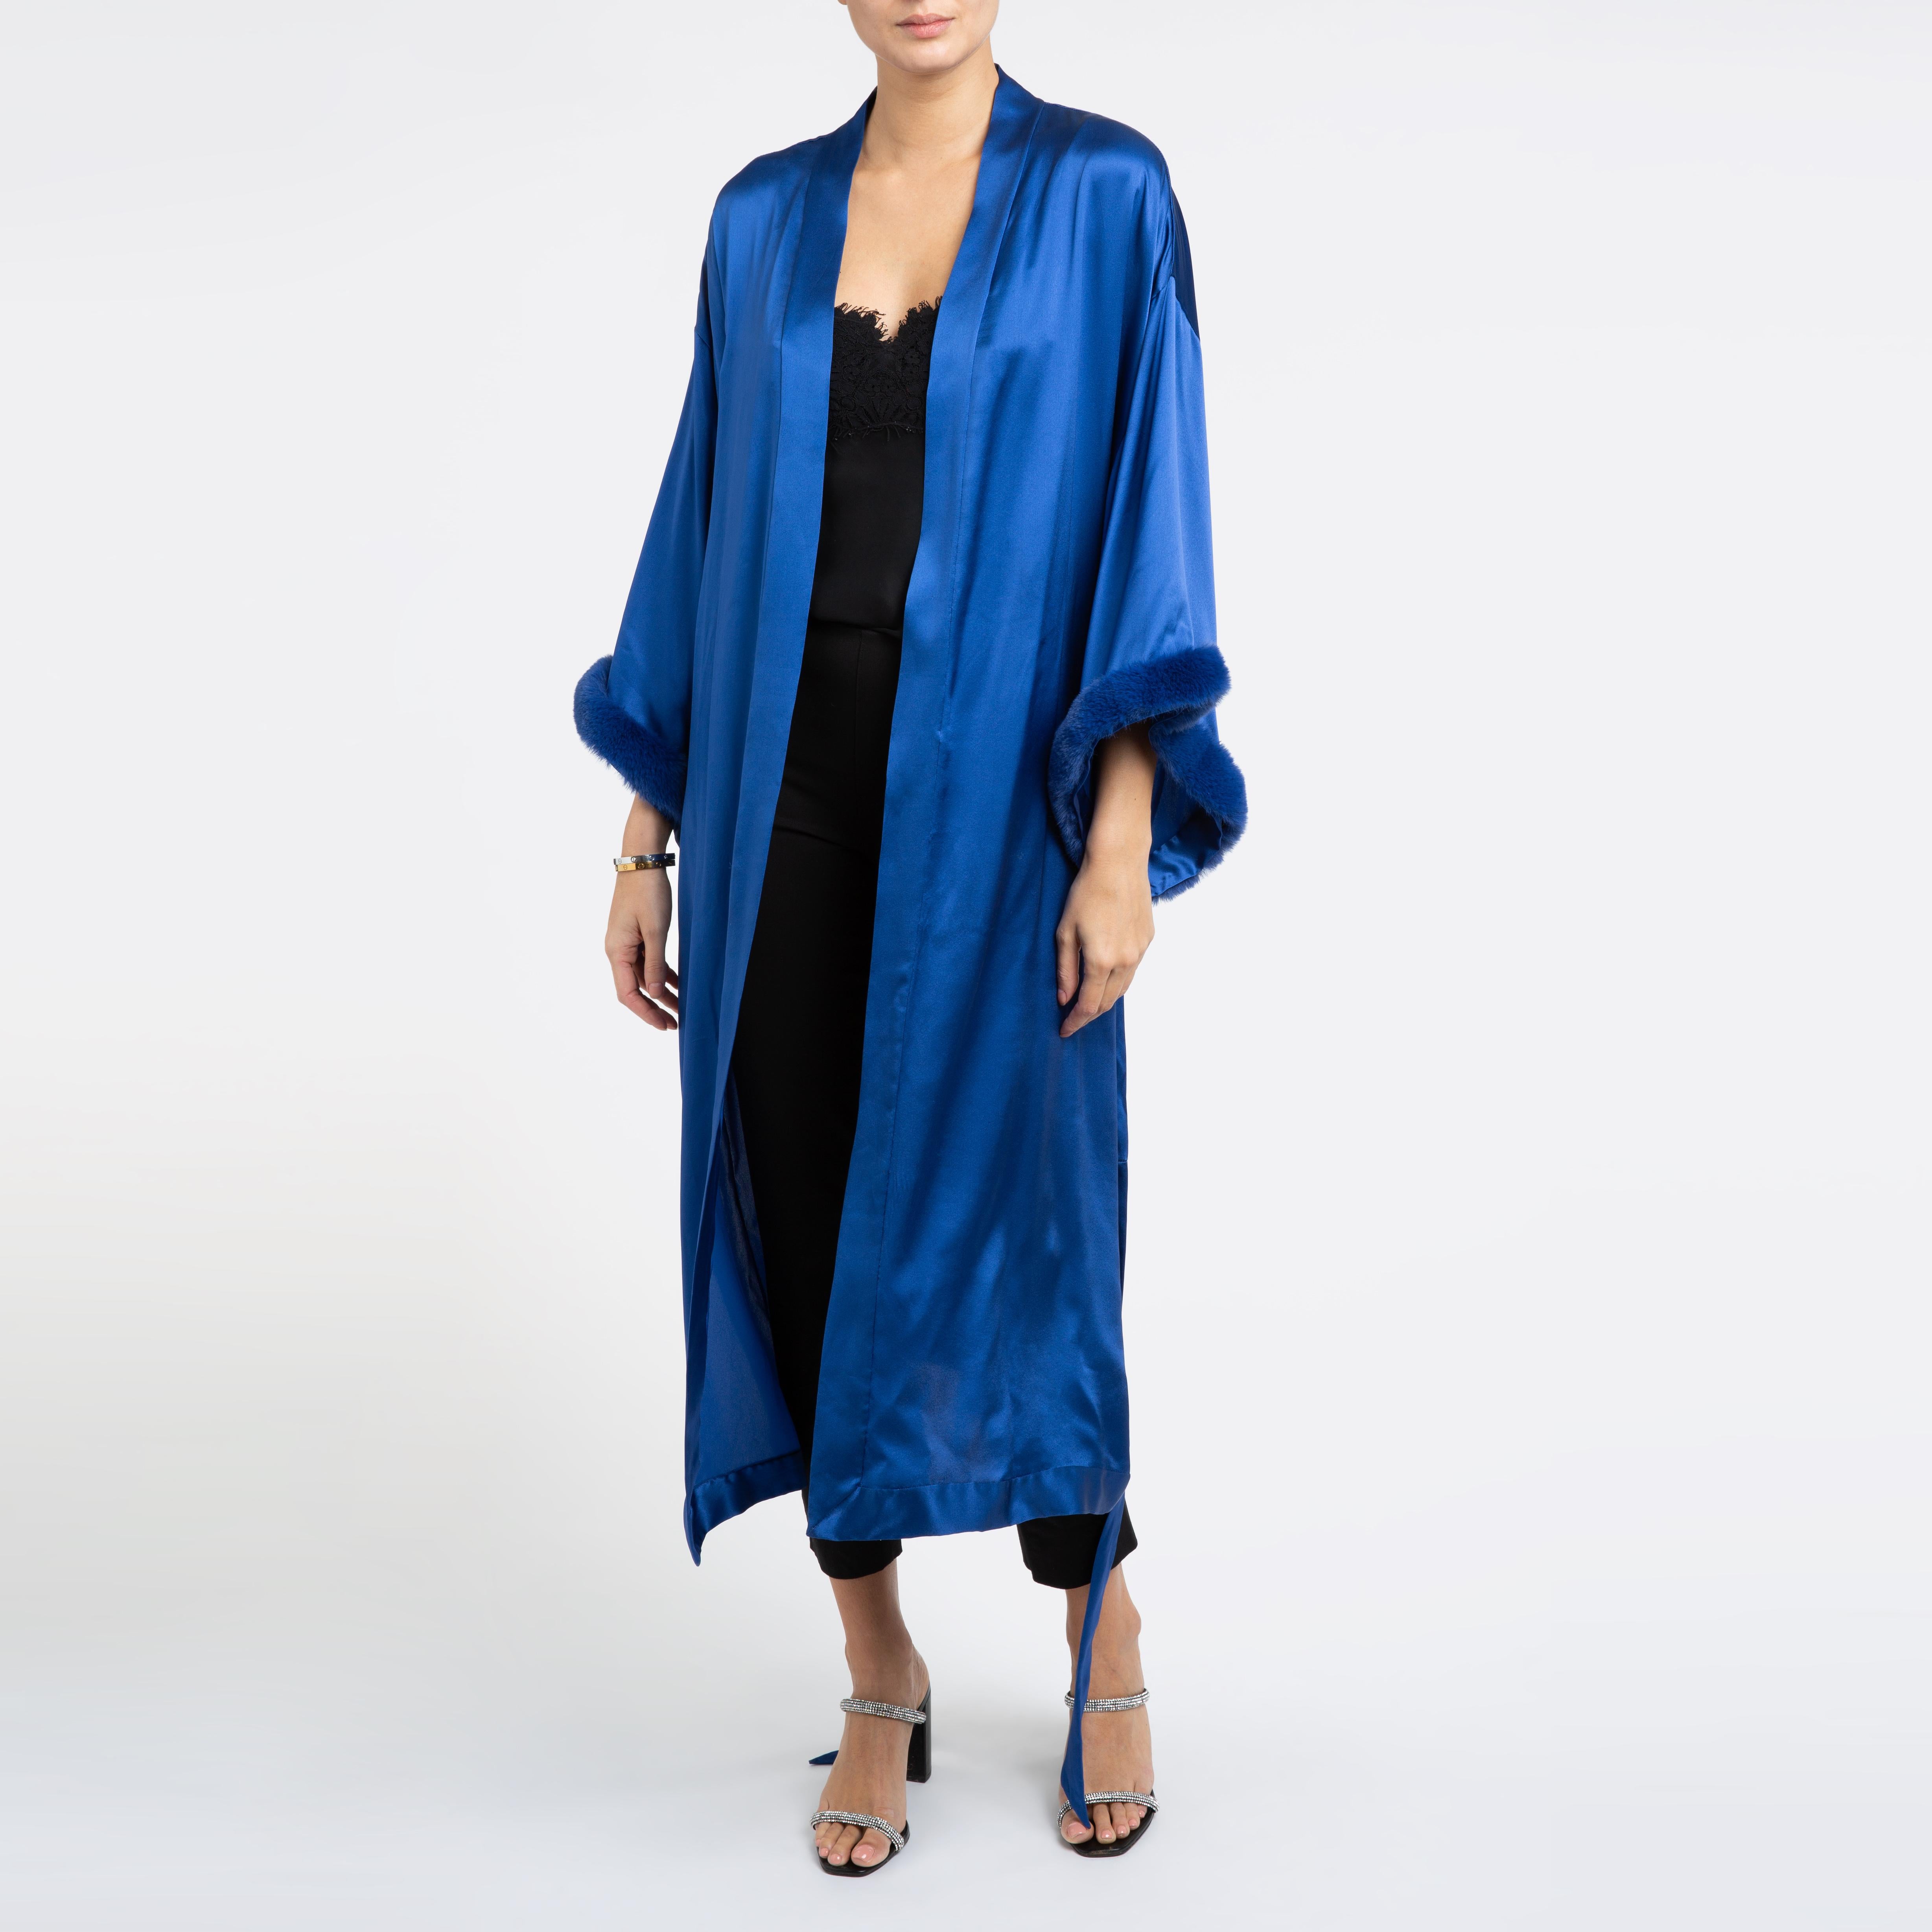 Verheyen London Blue Kimono in Italian Silk Satin with Faux Fur - Small-medium 

The Verheyen London Kimono is the perfect dress for evening wear or coat dress to wear with a pair of jeans and heels in the evening.  
Handmade in London, made with